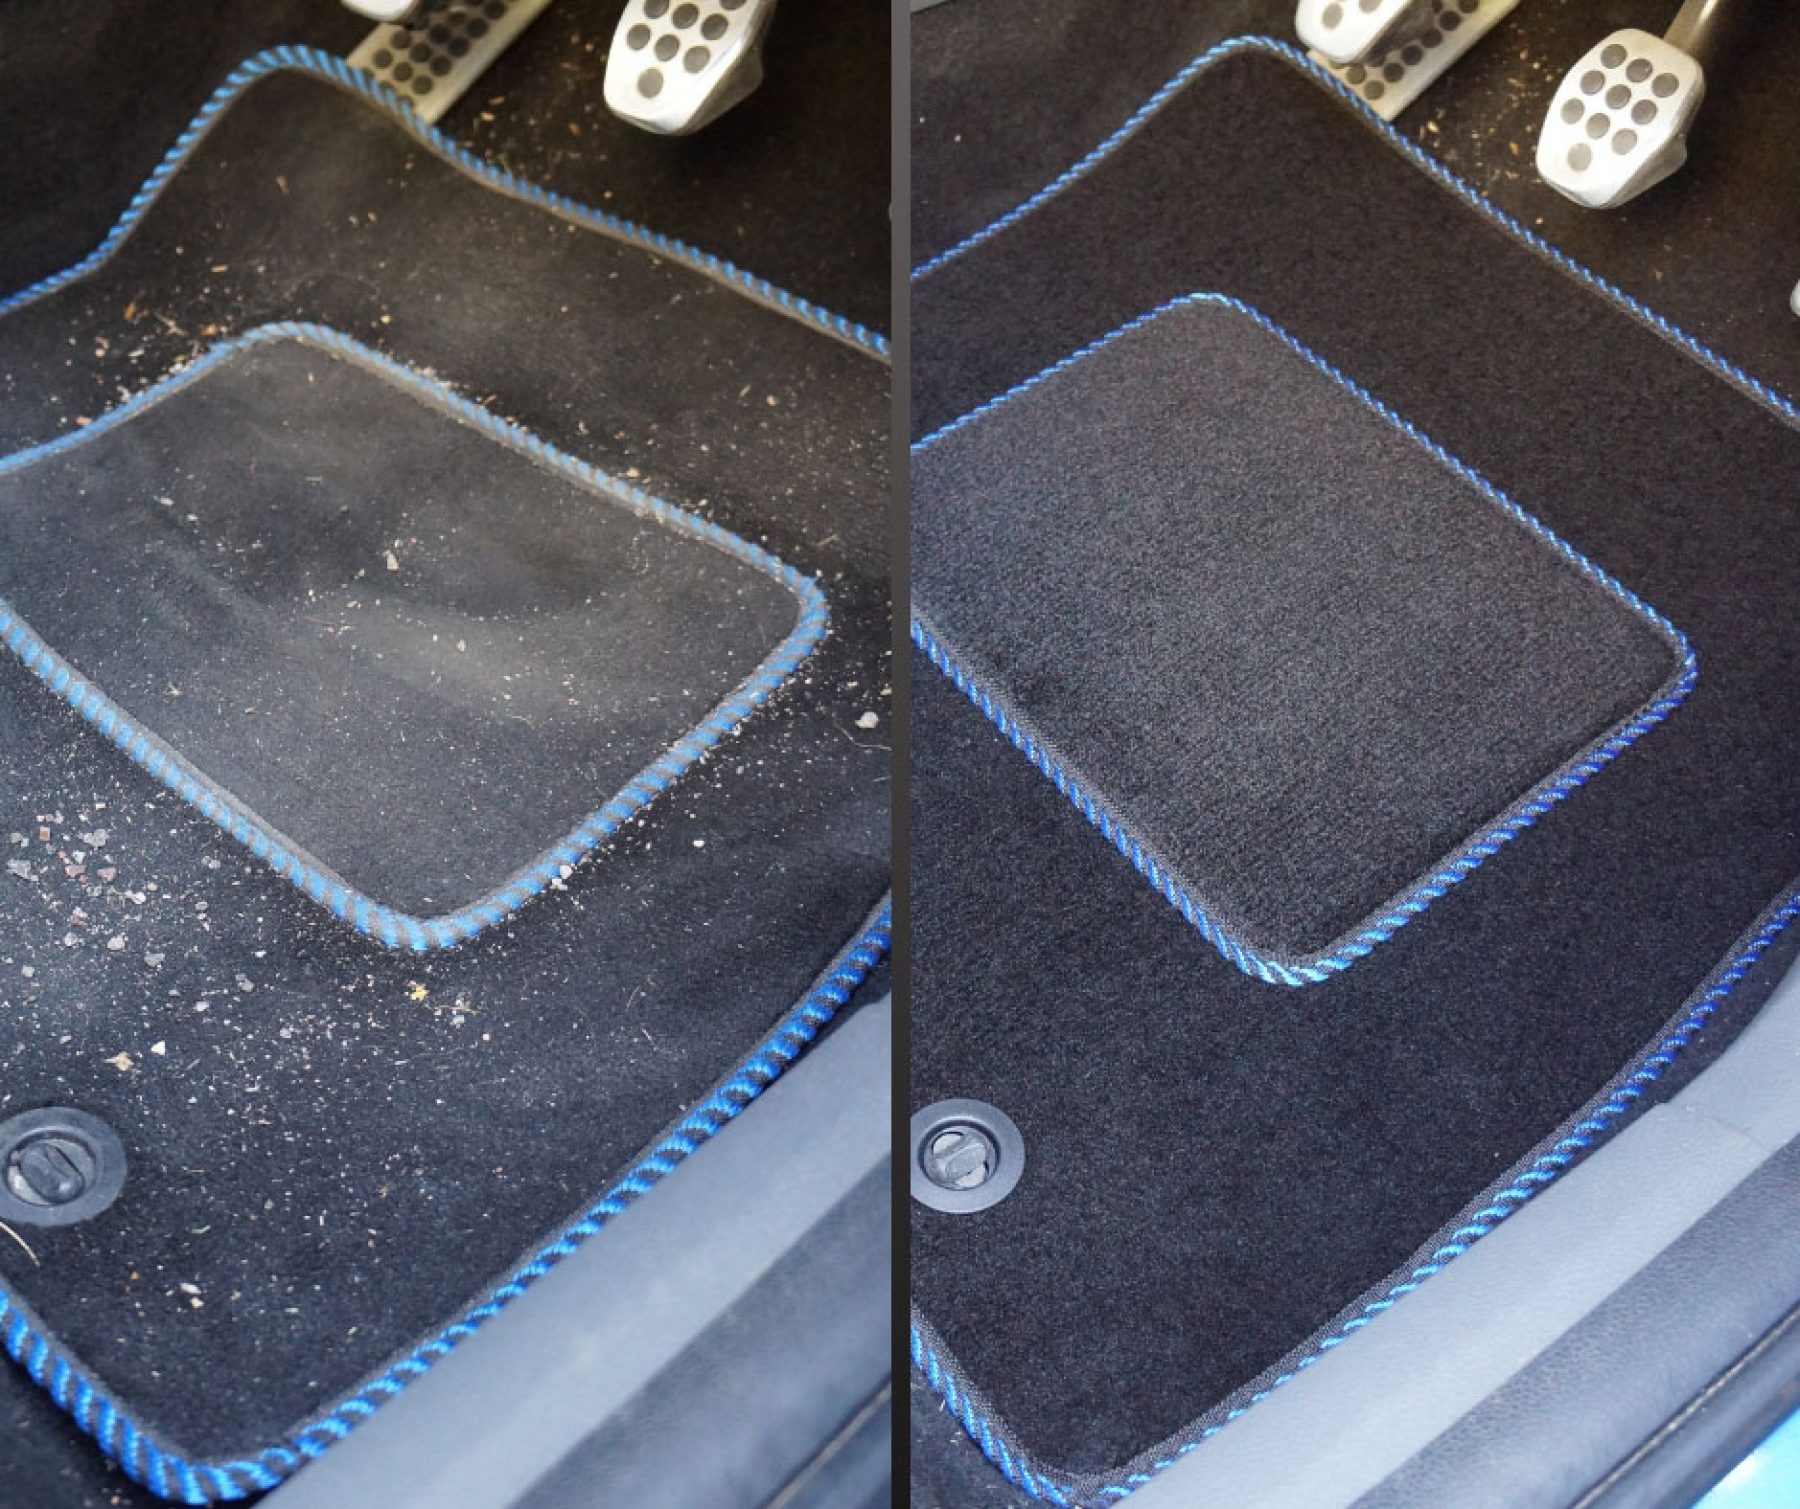 Chemical Guys - Clean your rubber or vinyl floor mats and